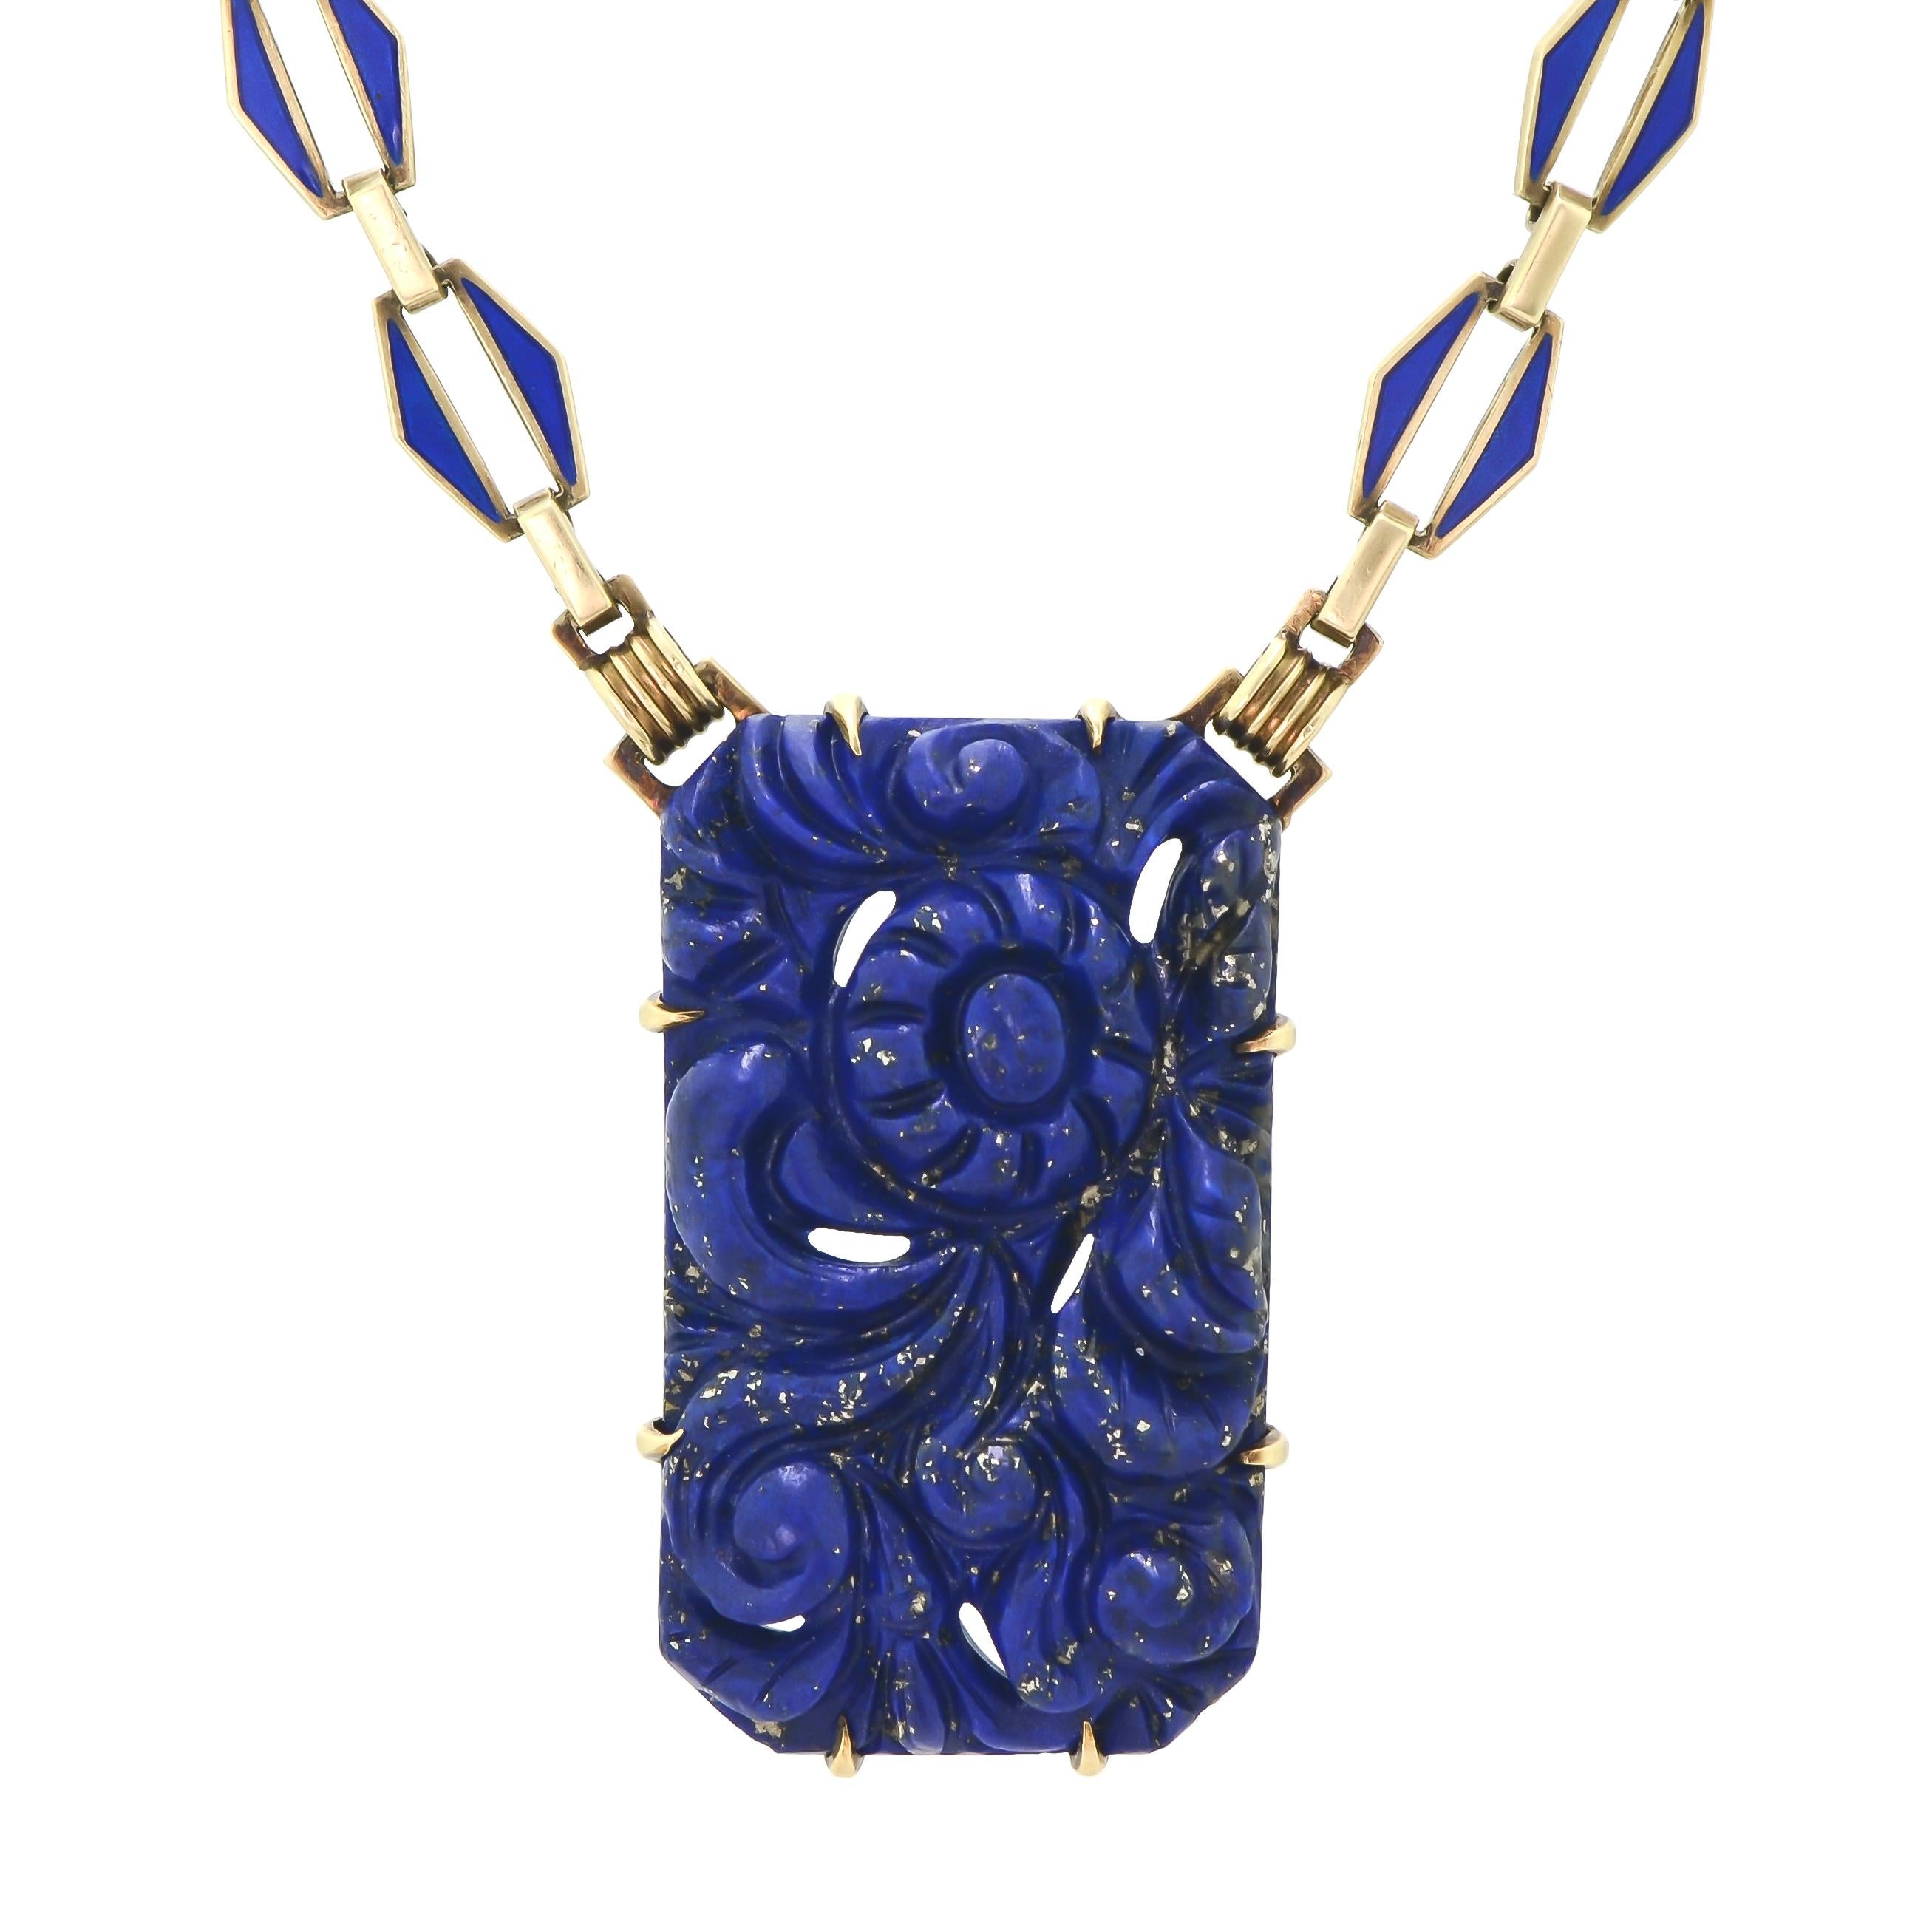 Sensational Art Deco lapis and enamel necklace containing a total of five (5) vivid royal blue Lapis Lazuli plaques. Each plaque is craved with graceful foliate design joined by classic Art Deco blue enamel links of fluted 14K yellow gold in this